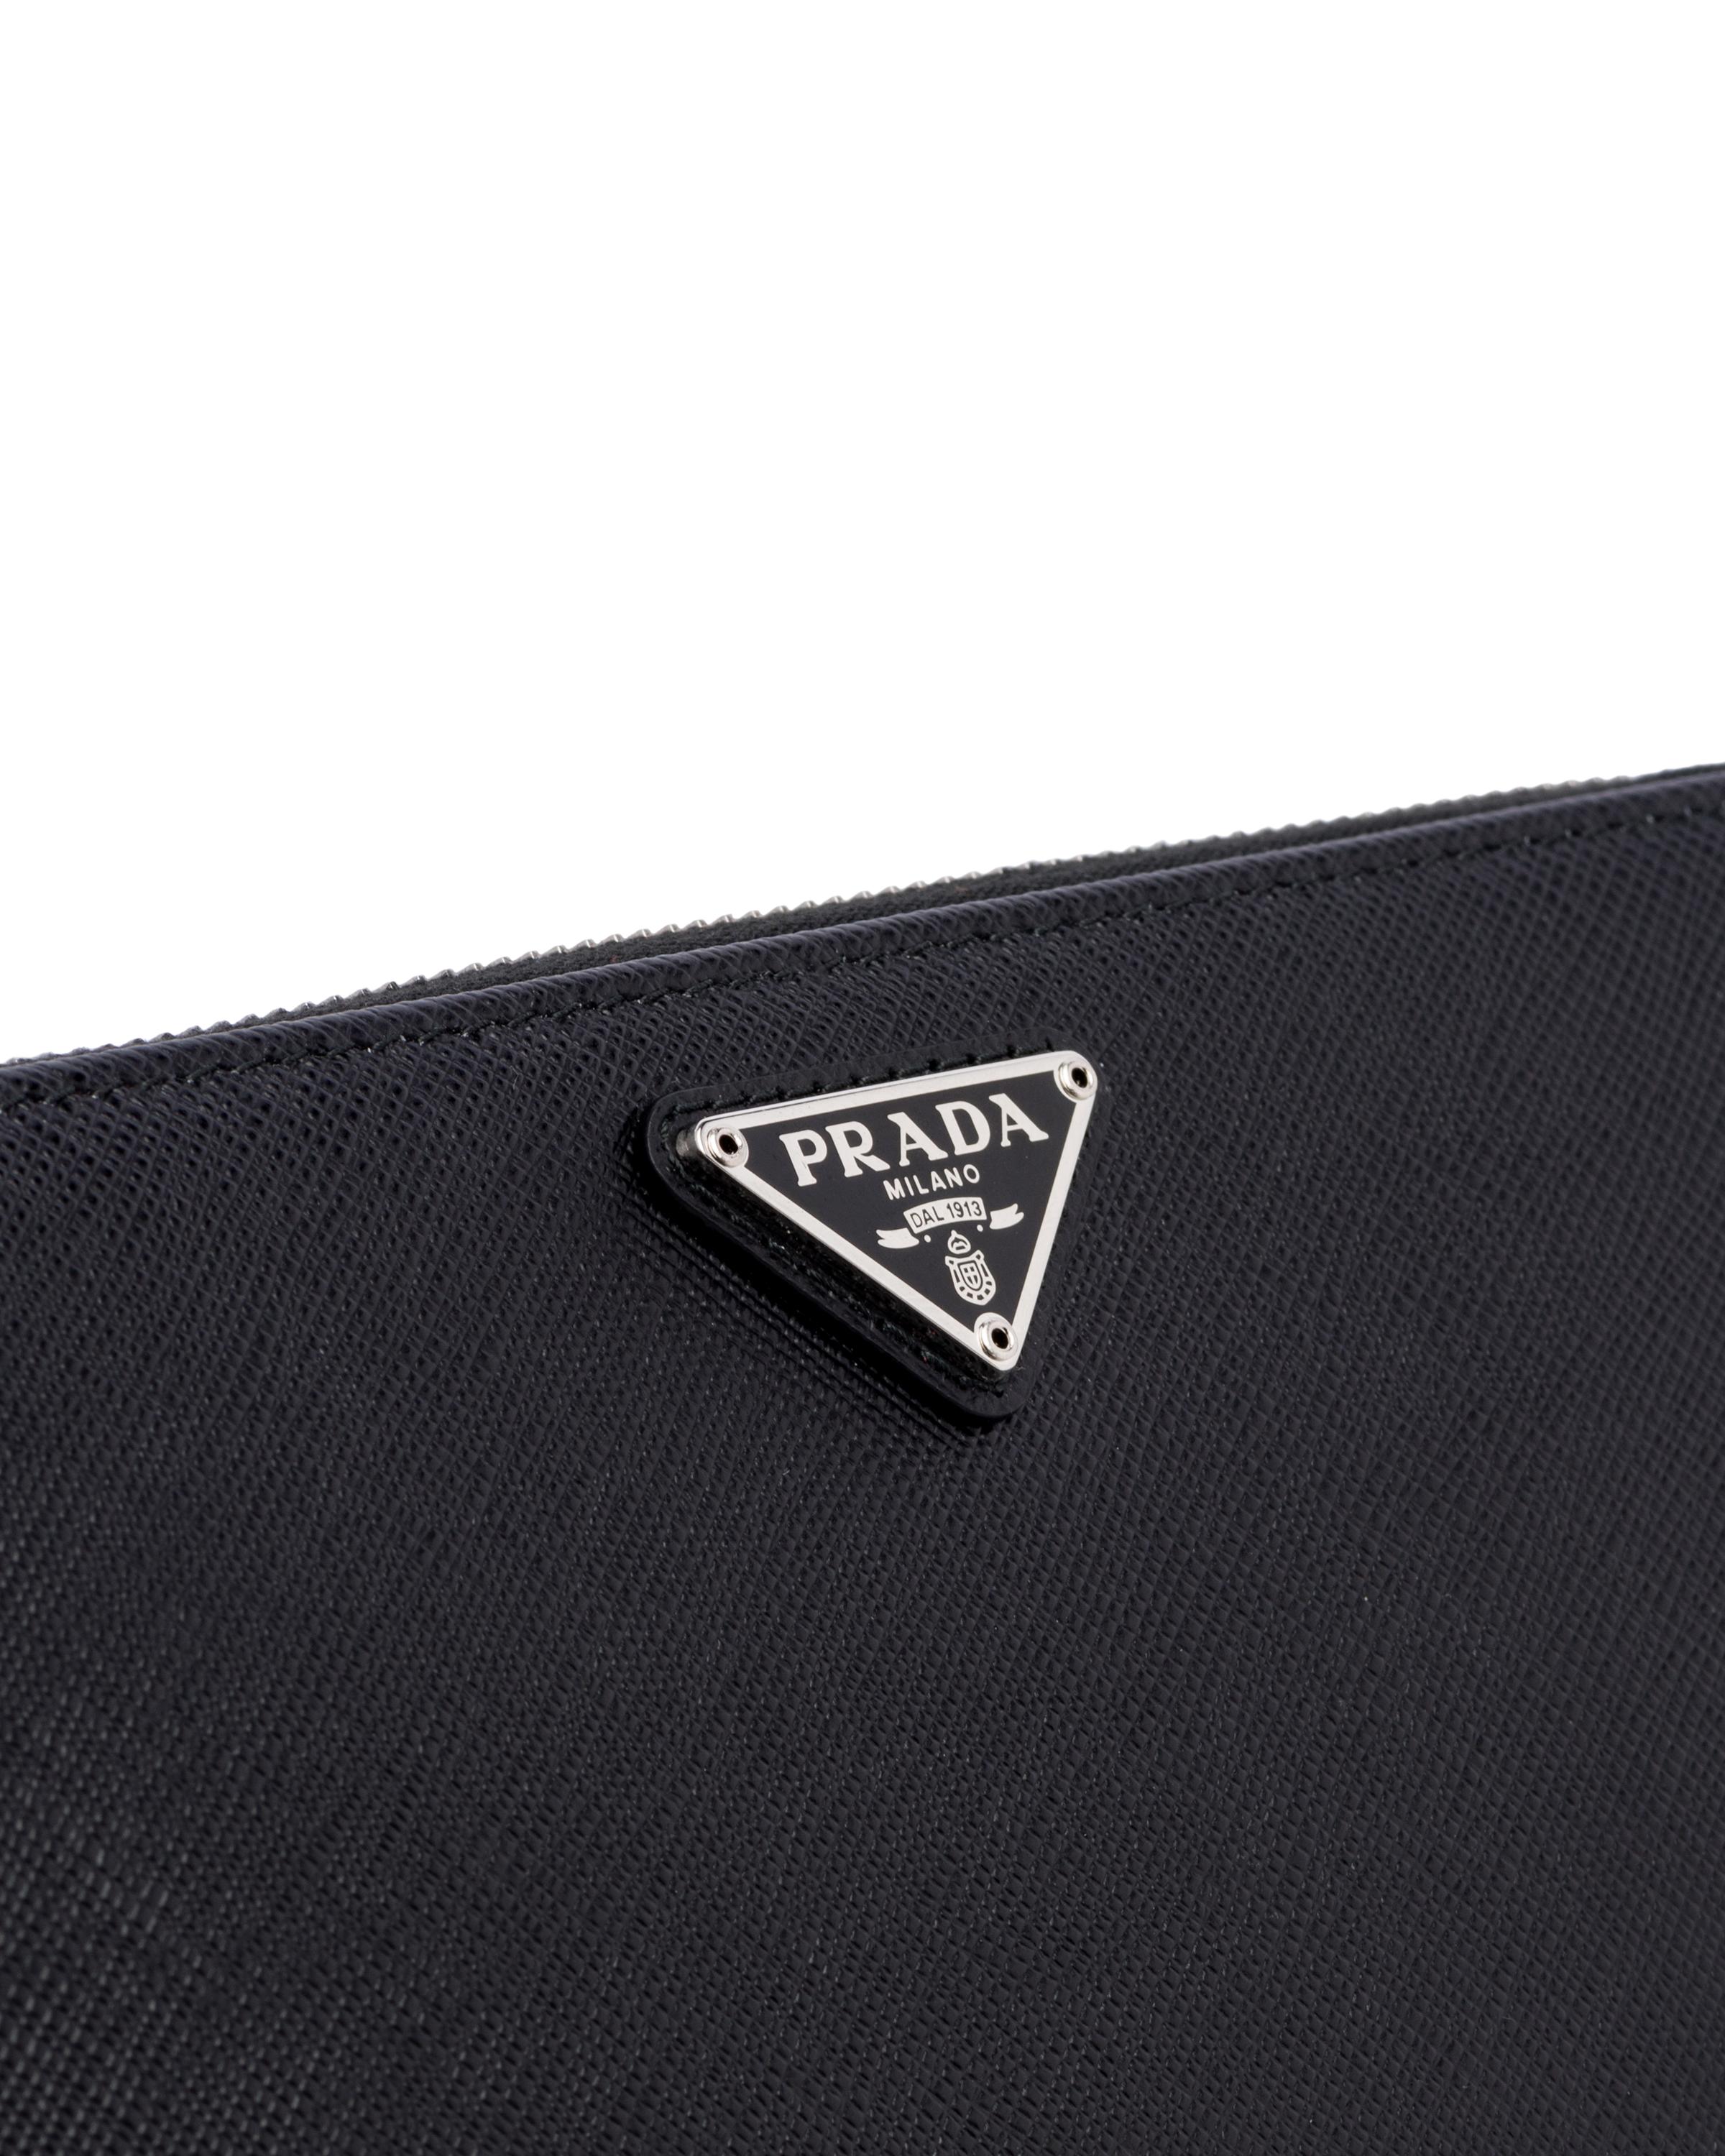 Prada Large Saffiano Leather Wallet in Black - Lyst